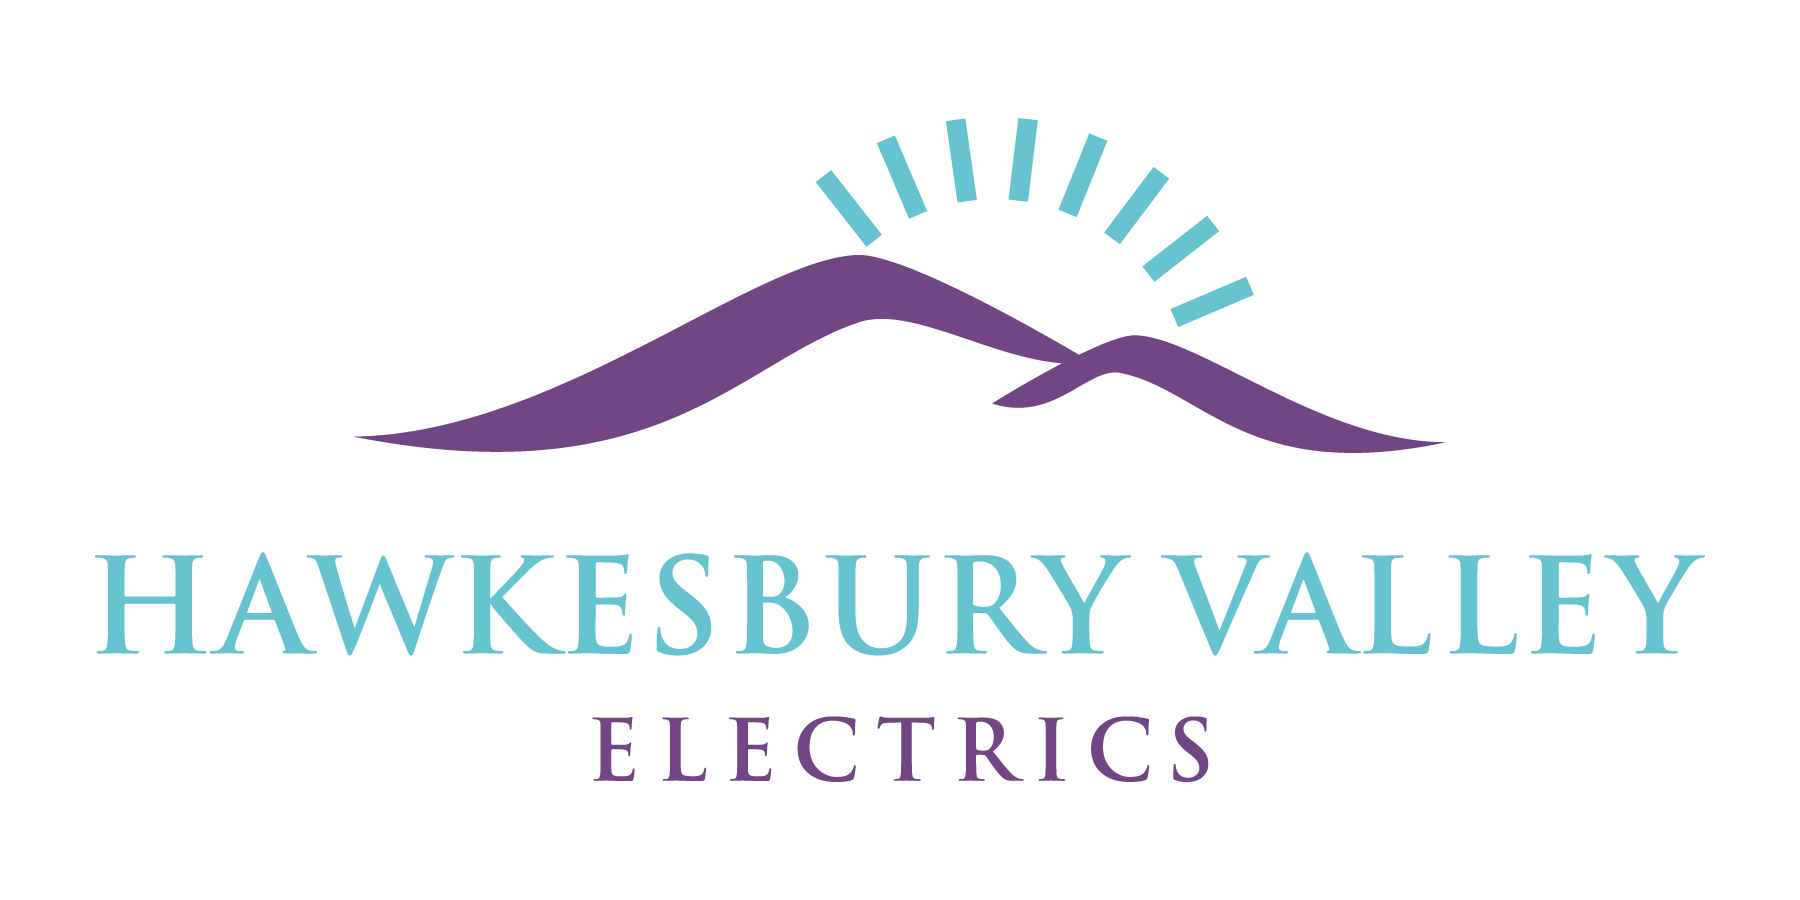 Hawkesbury-Valley-Electrical